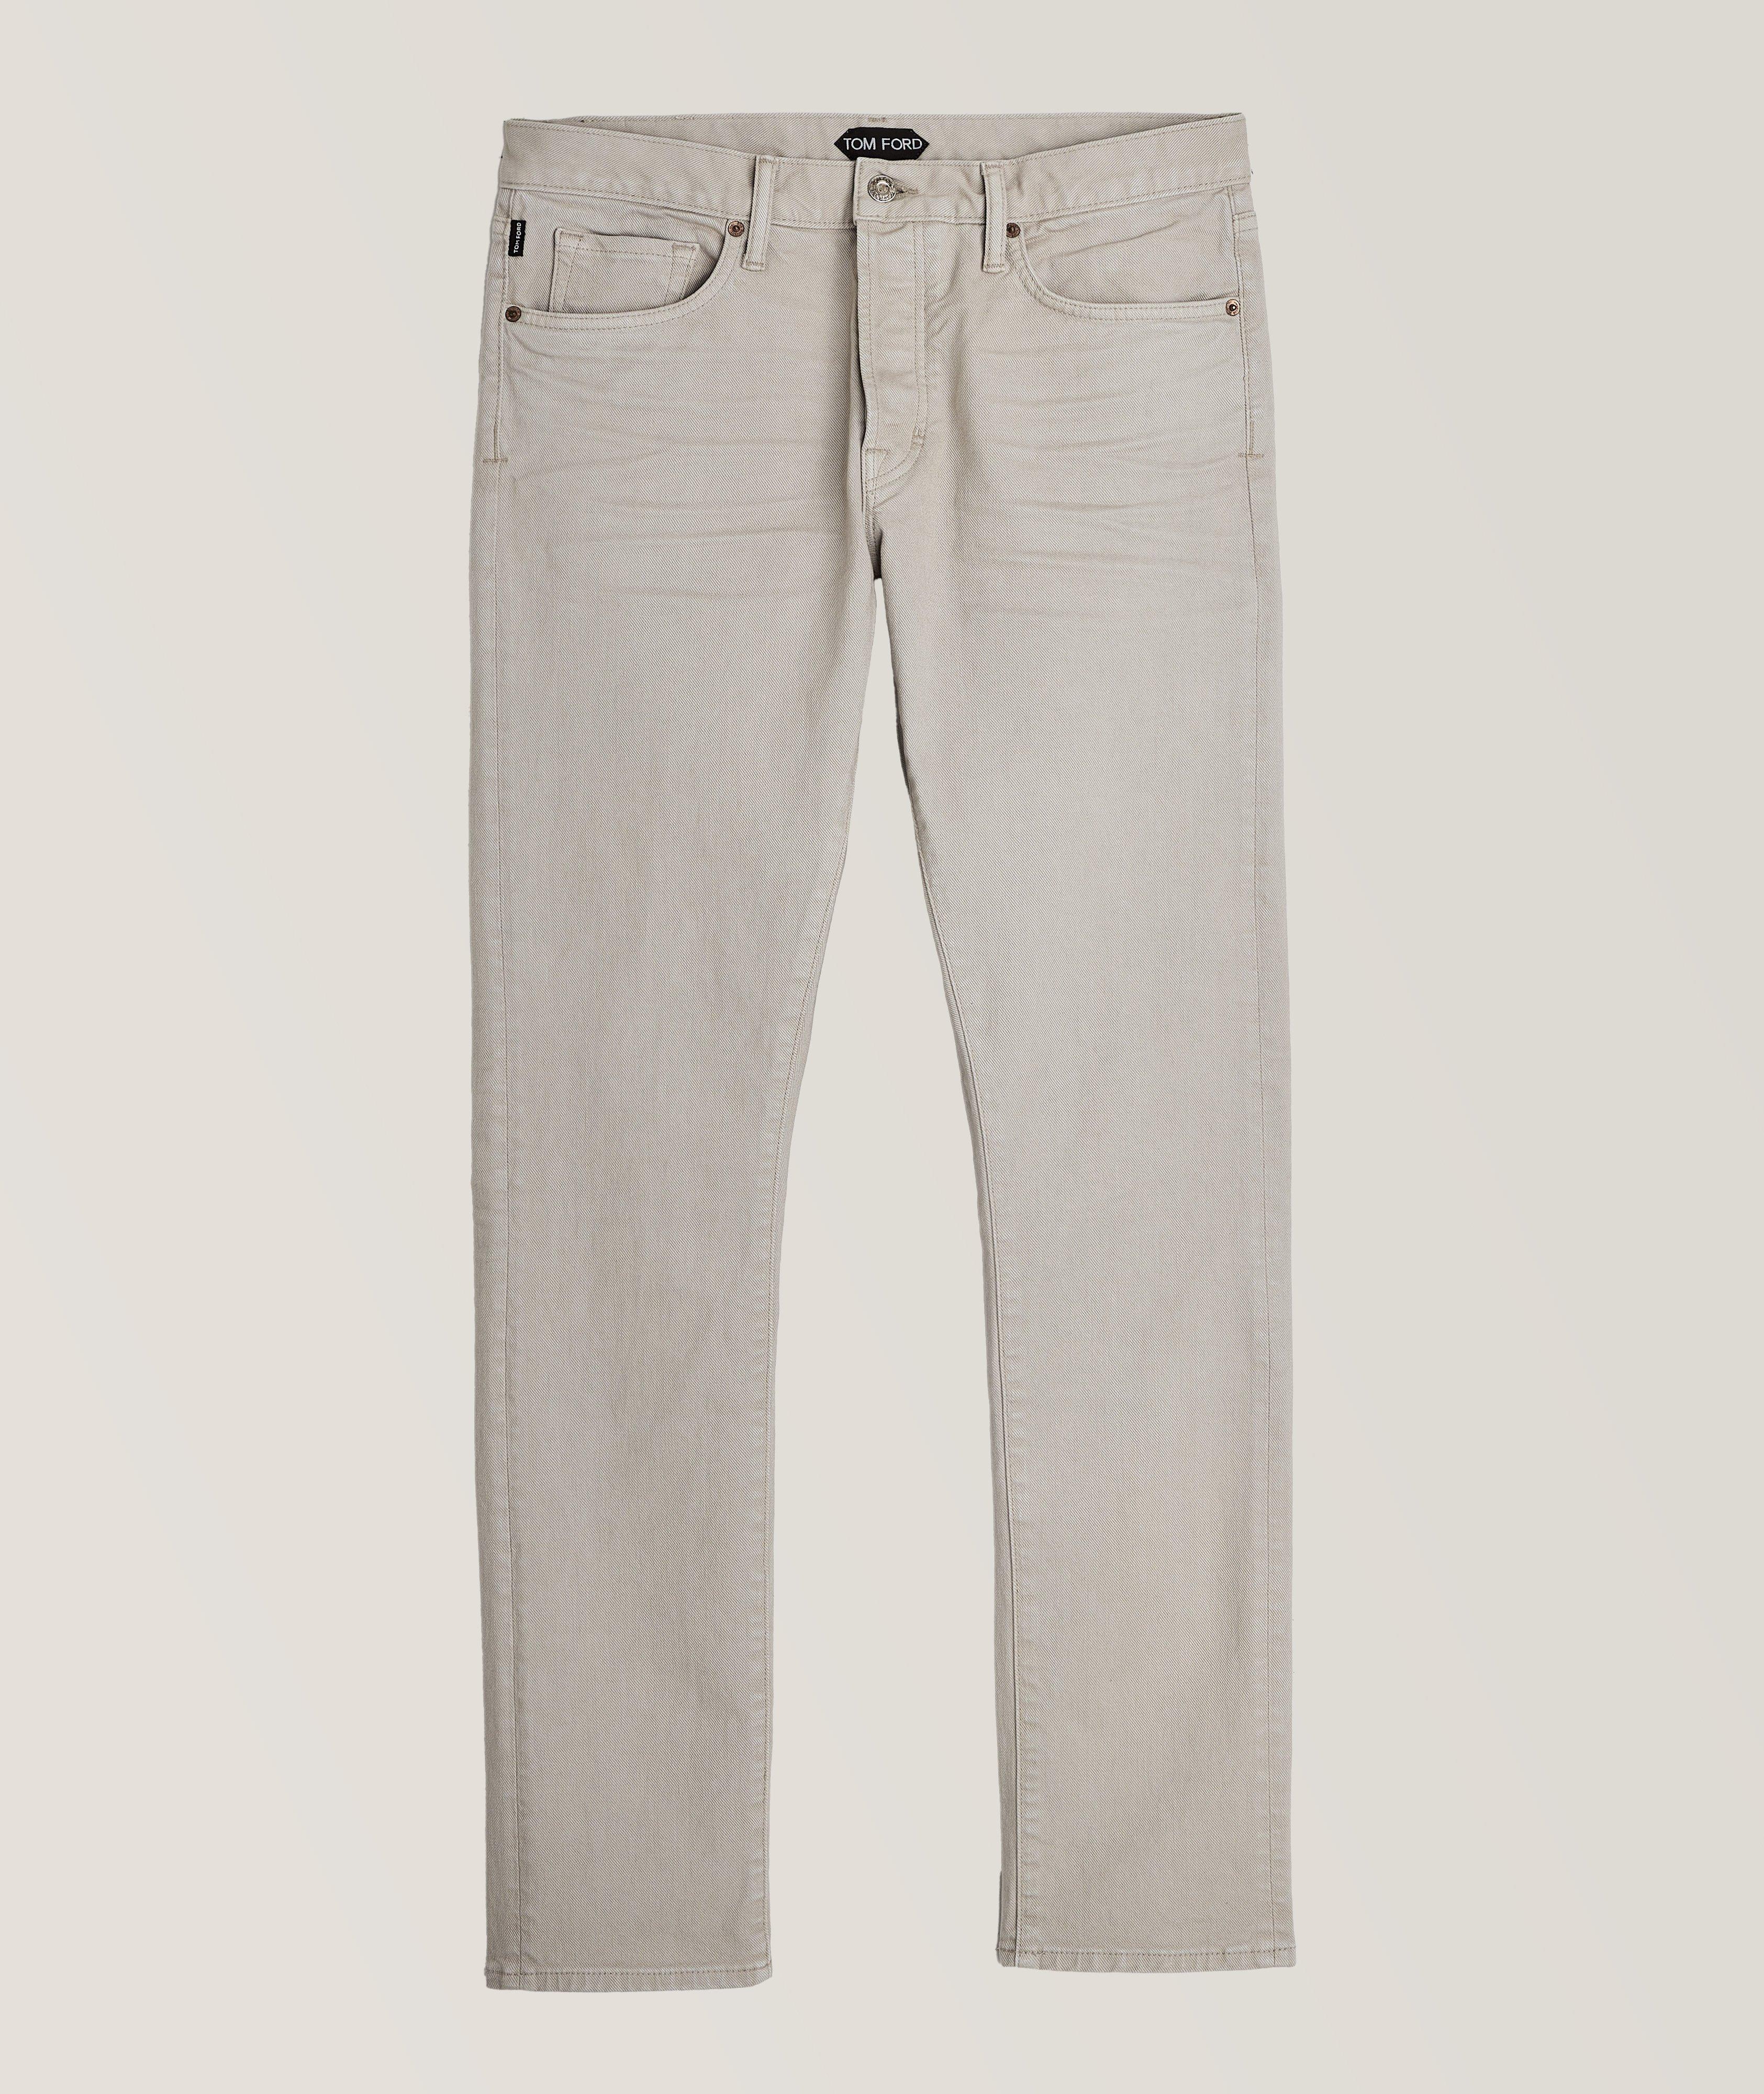 Slim Fit Twill Cotton Jeans image 0